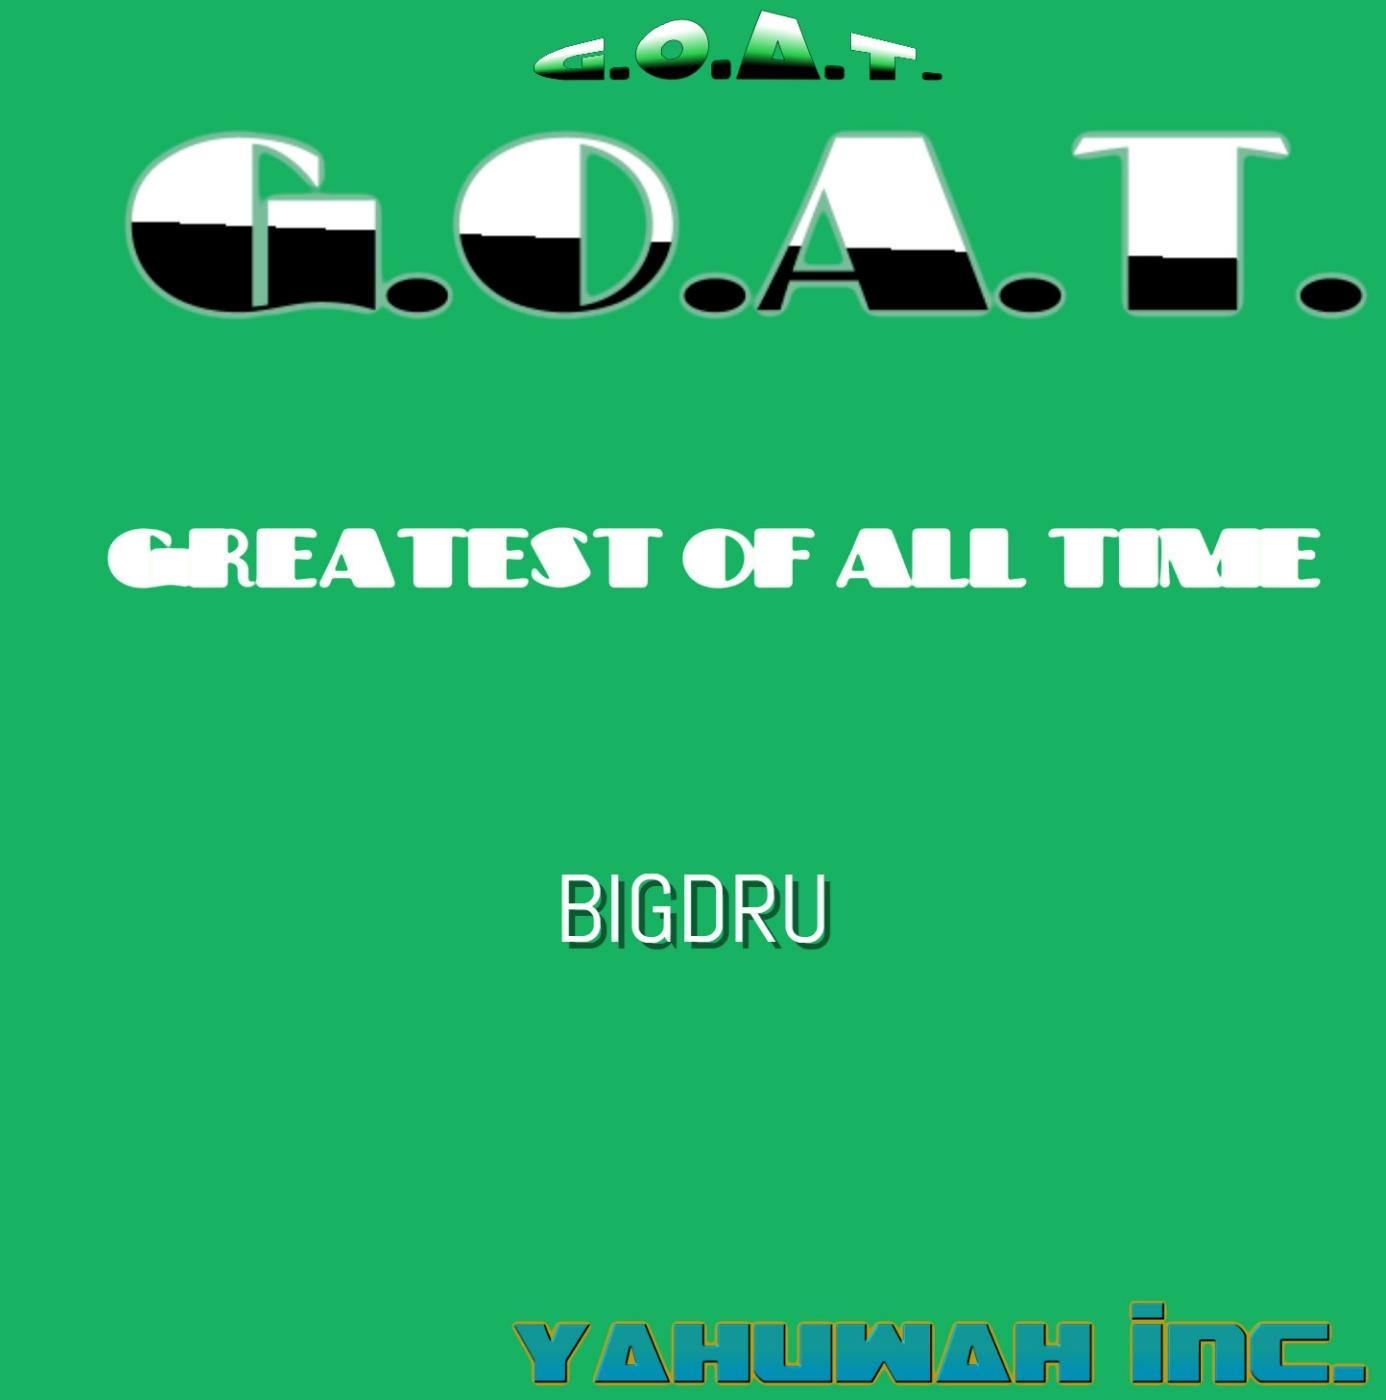 G.O.A.T. GREATEST OF ALL TIME